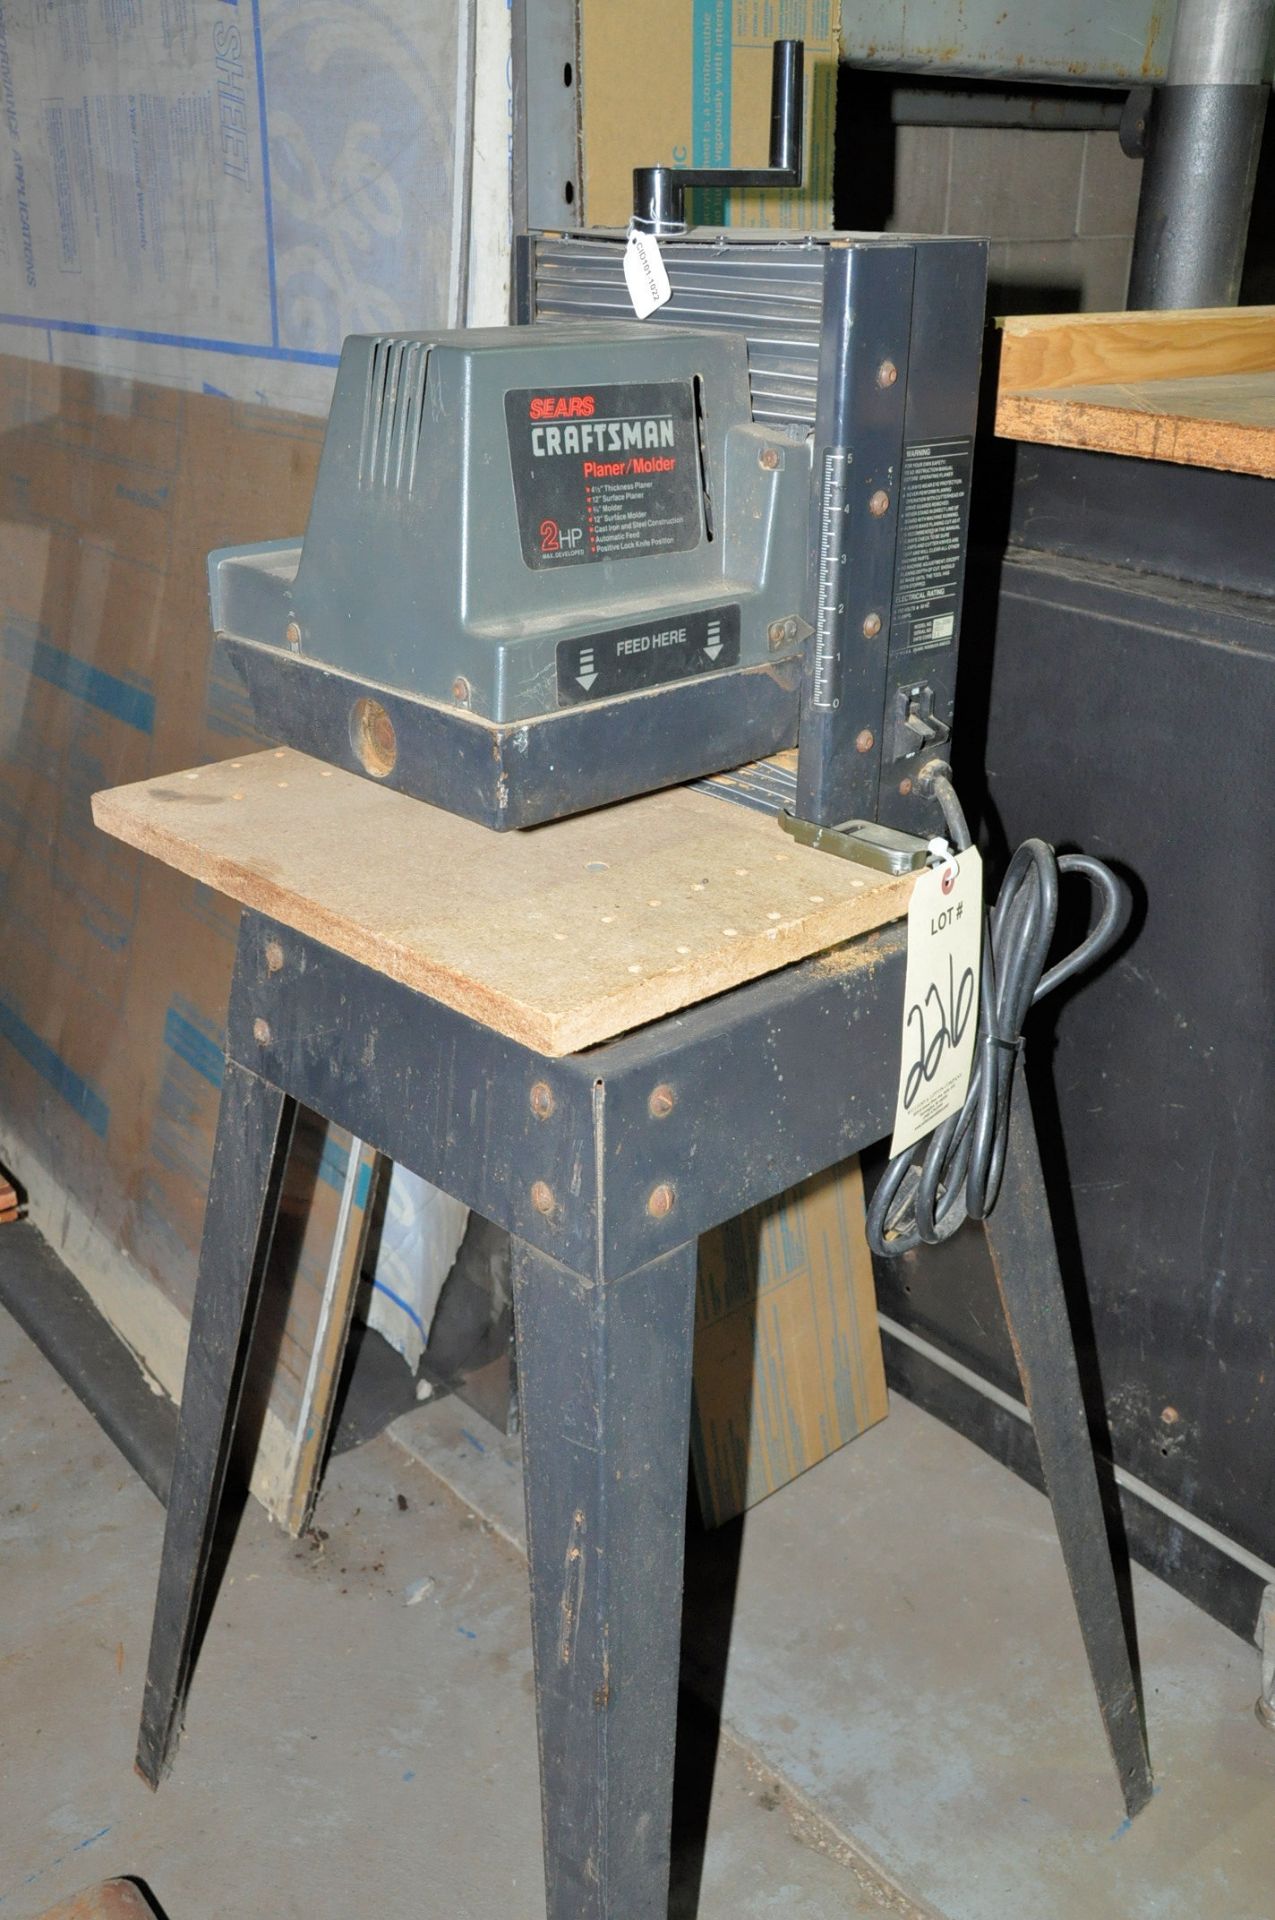 Craftsman Planer/Molder; Capacities: 4 1/2" Thick; 12" Surface and 3/4" Molder; 1-PH